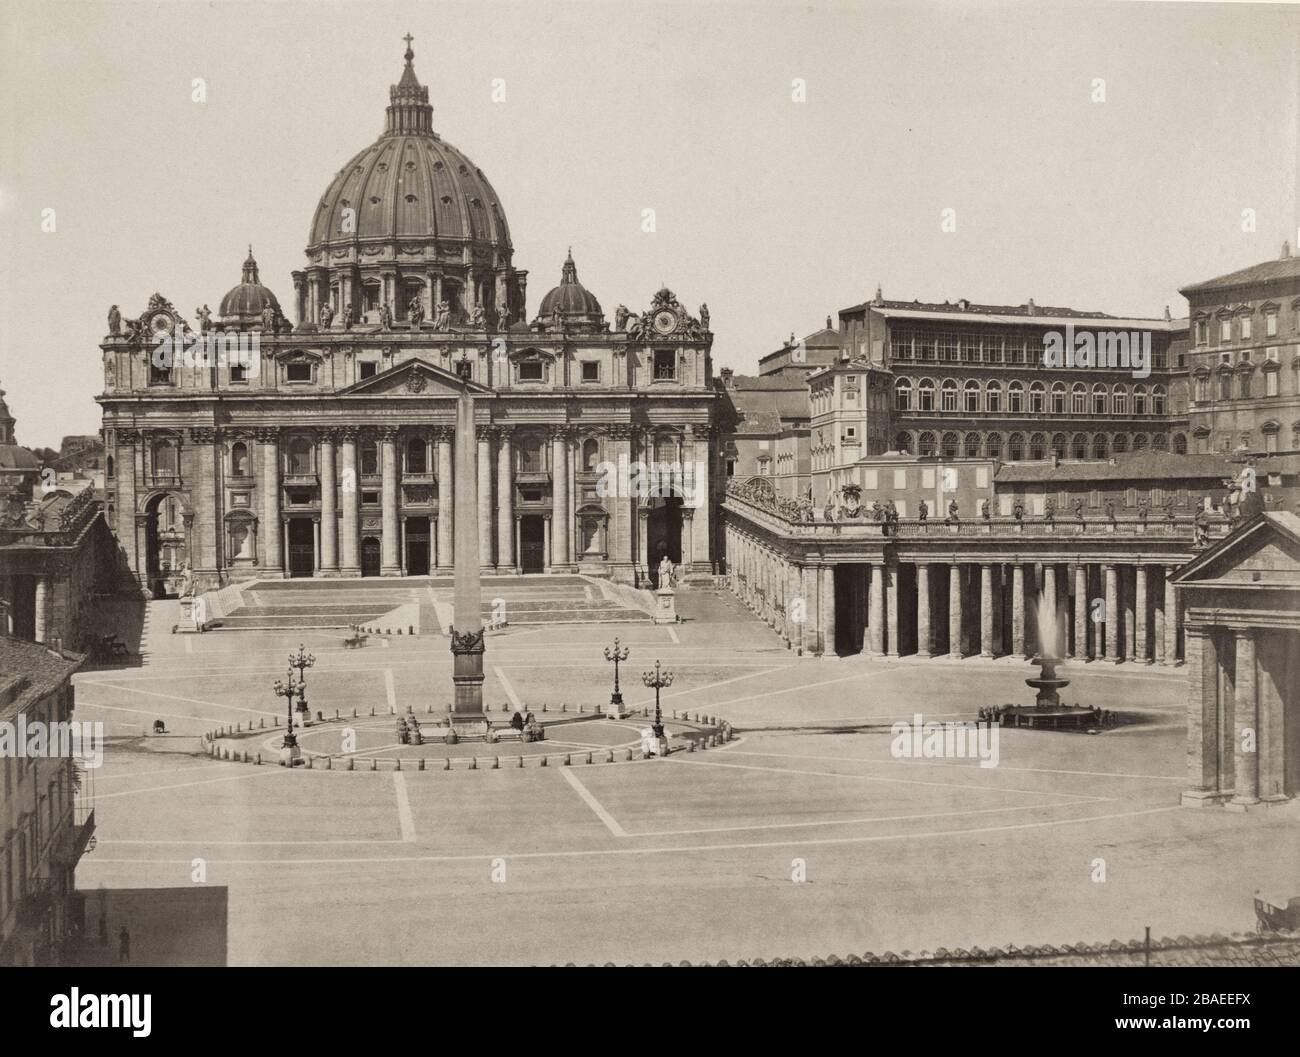 19th century image of the Papal Basilica of Saint Peter in the Vatican, or simply Saint Peter's Basilica, is a church built in the Renaissance style l Stock Photo